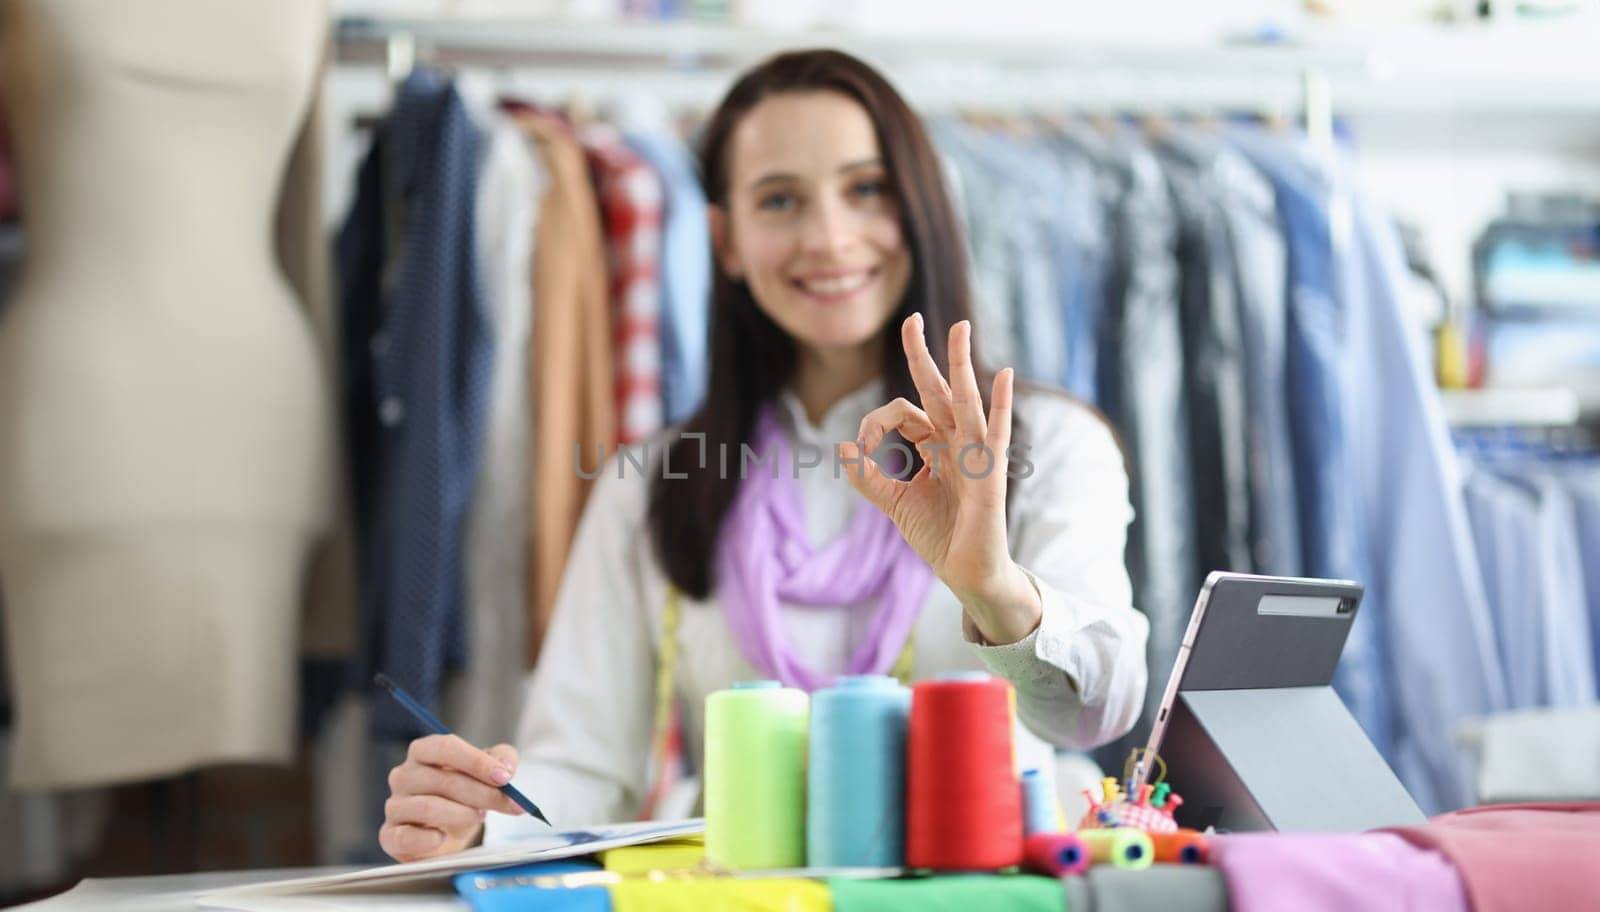 Dressmaker woman holding ok gesture while working in studio. Recommendations for tailoring stylish fashionable clothes and a successful atelier